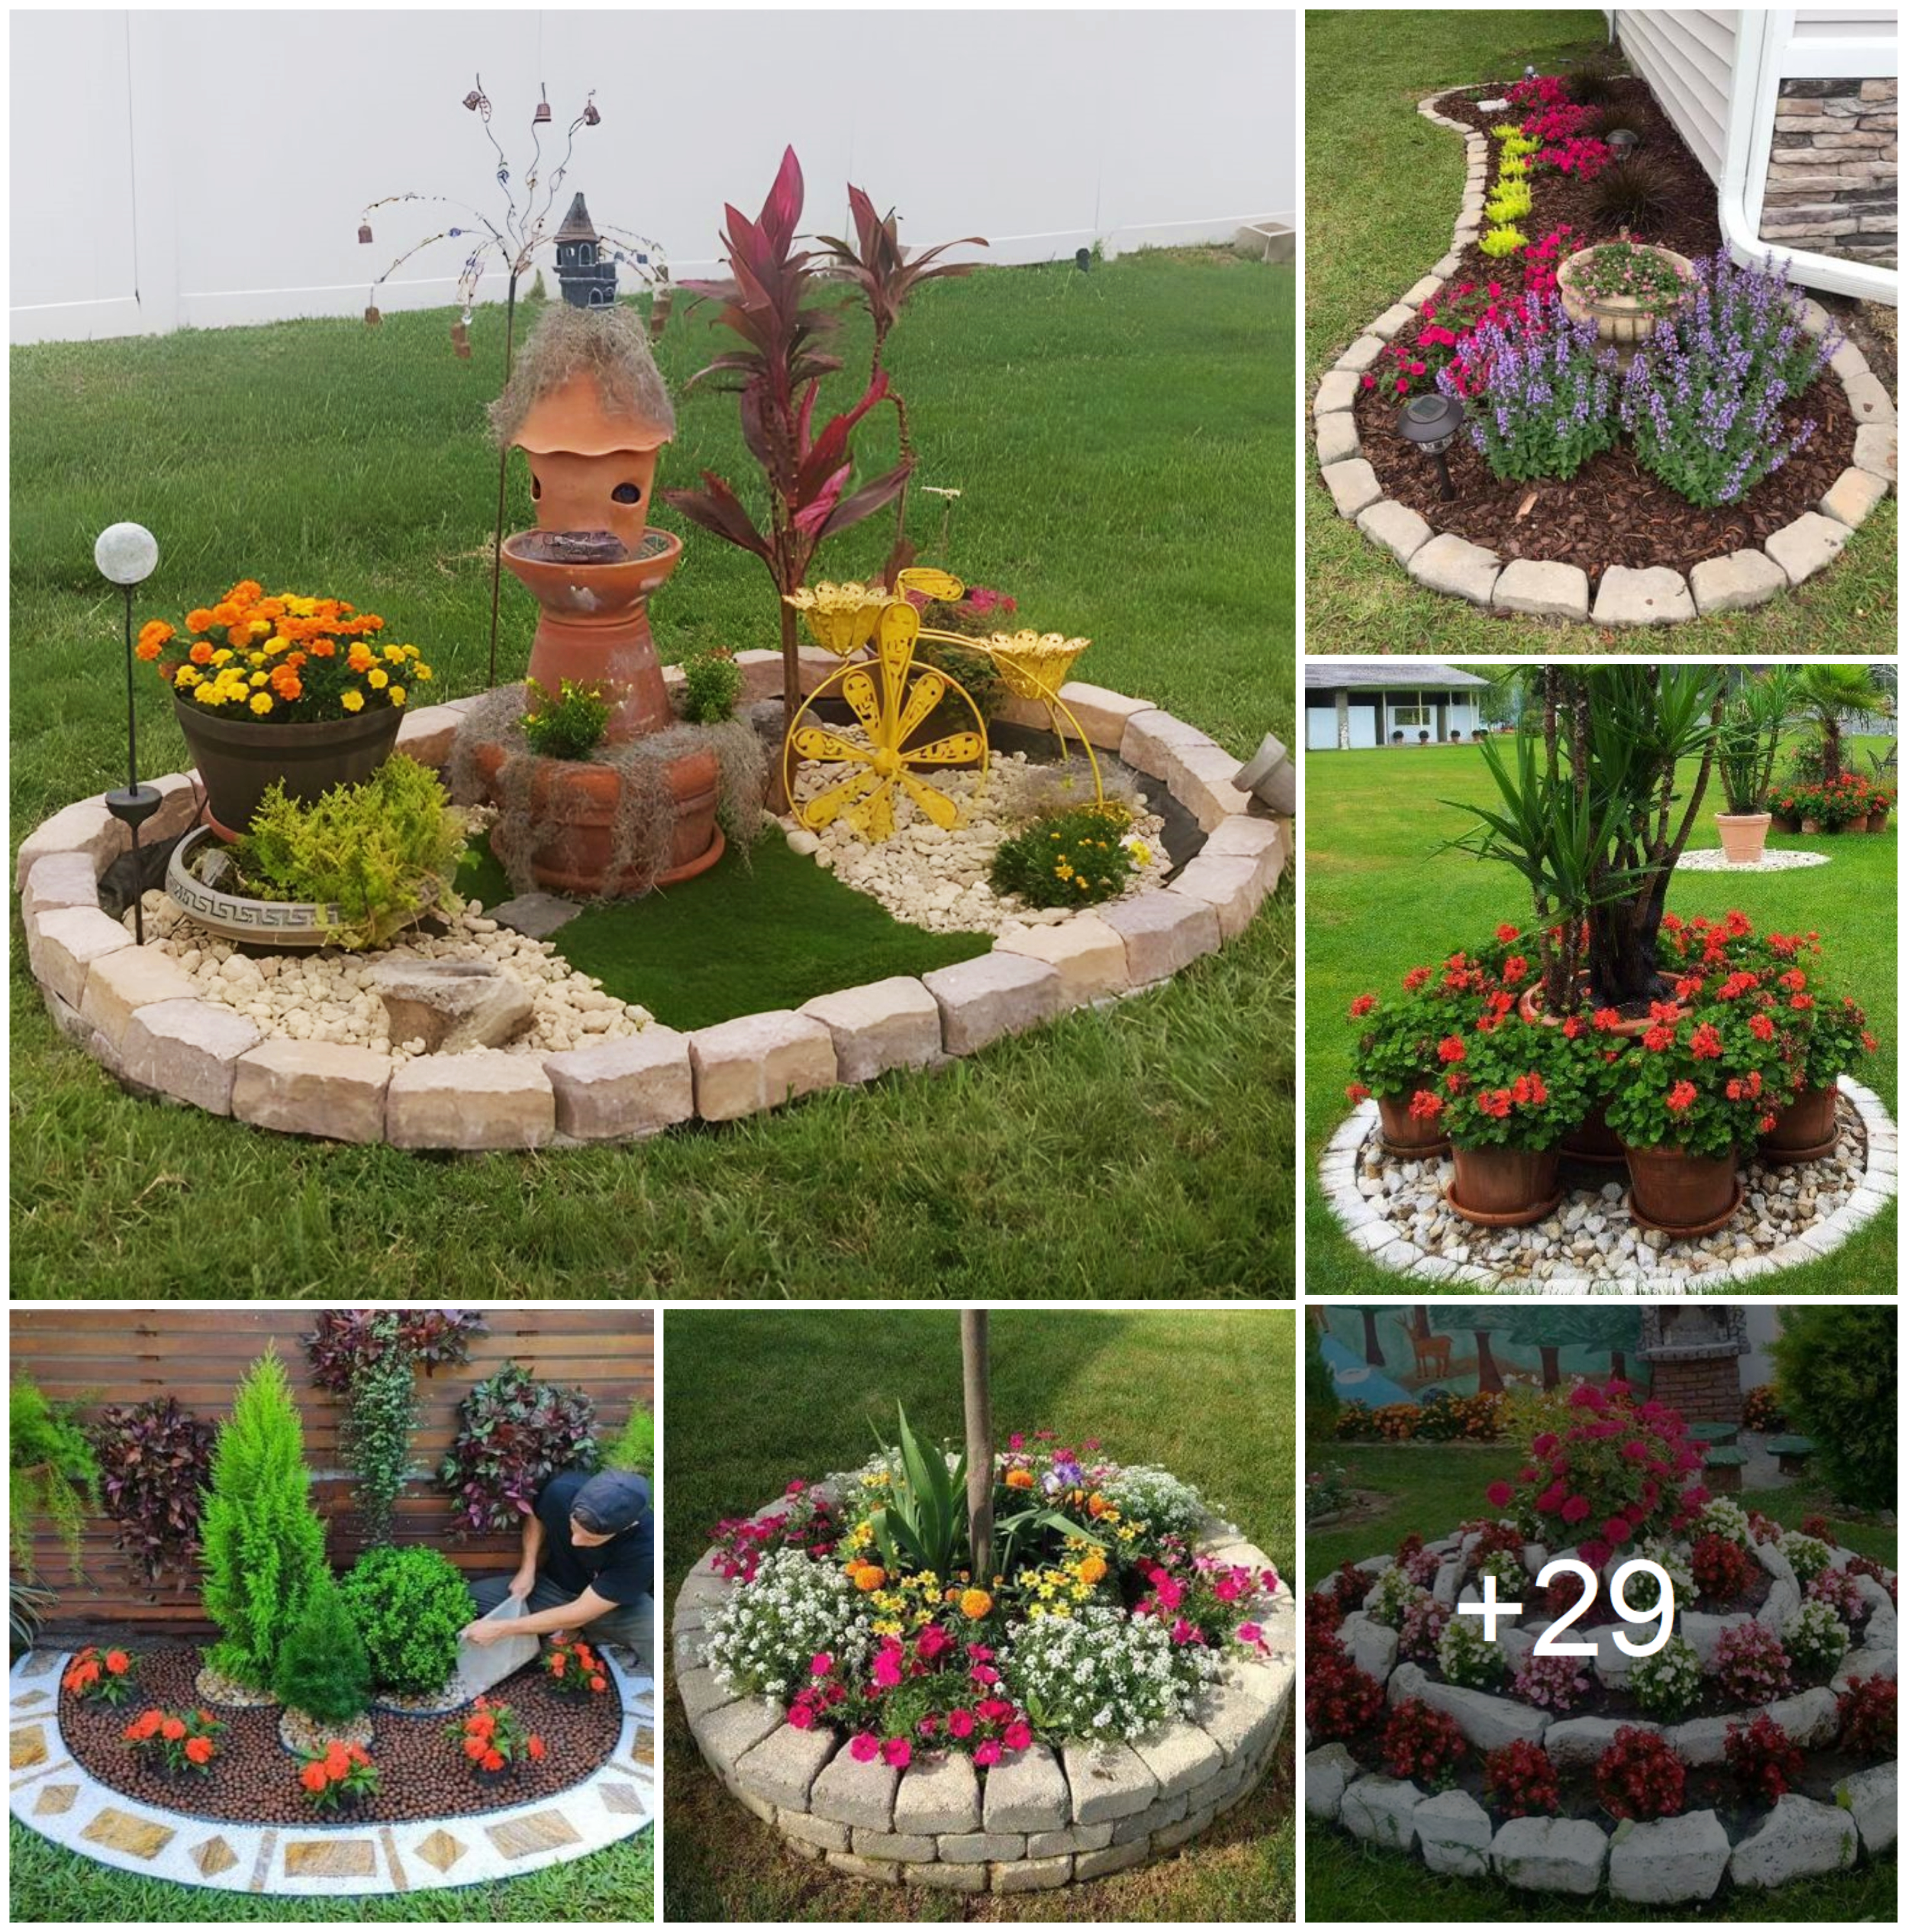 Design a charming garden with elegant decorations and garden islands